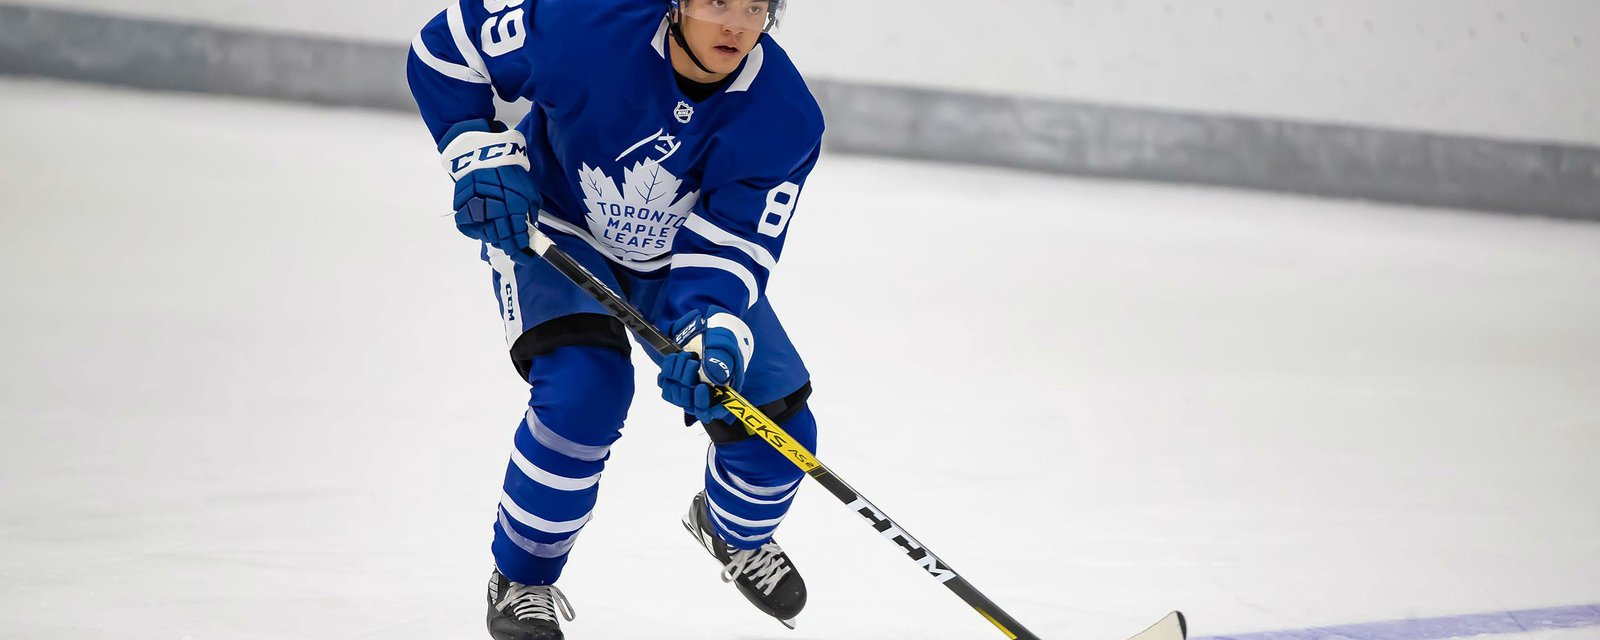 Leafs rookie set to make his NHL debut in Game 1.